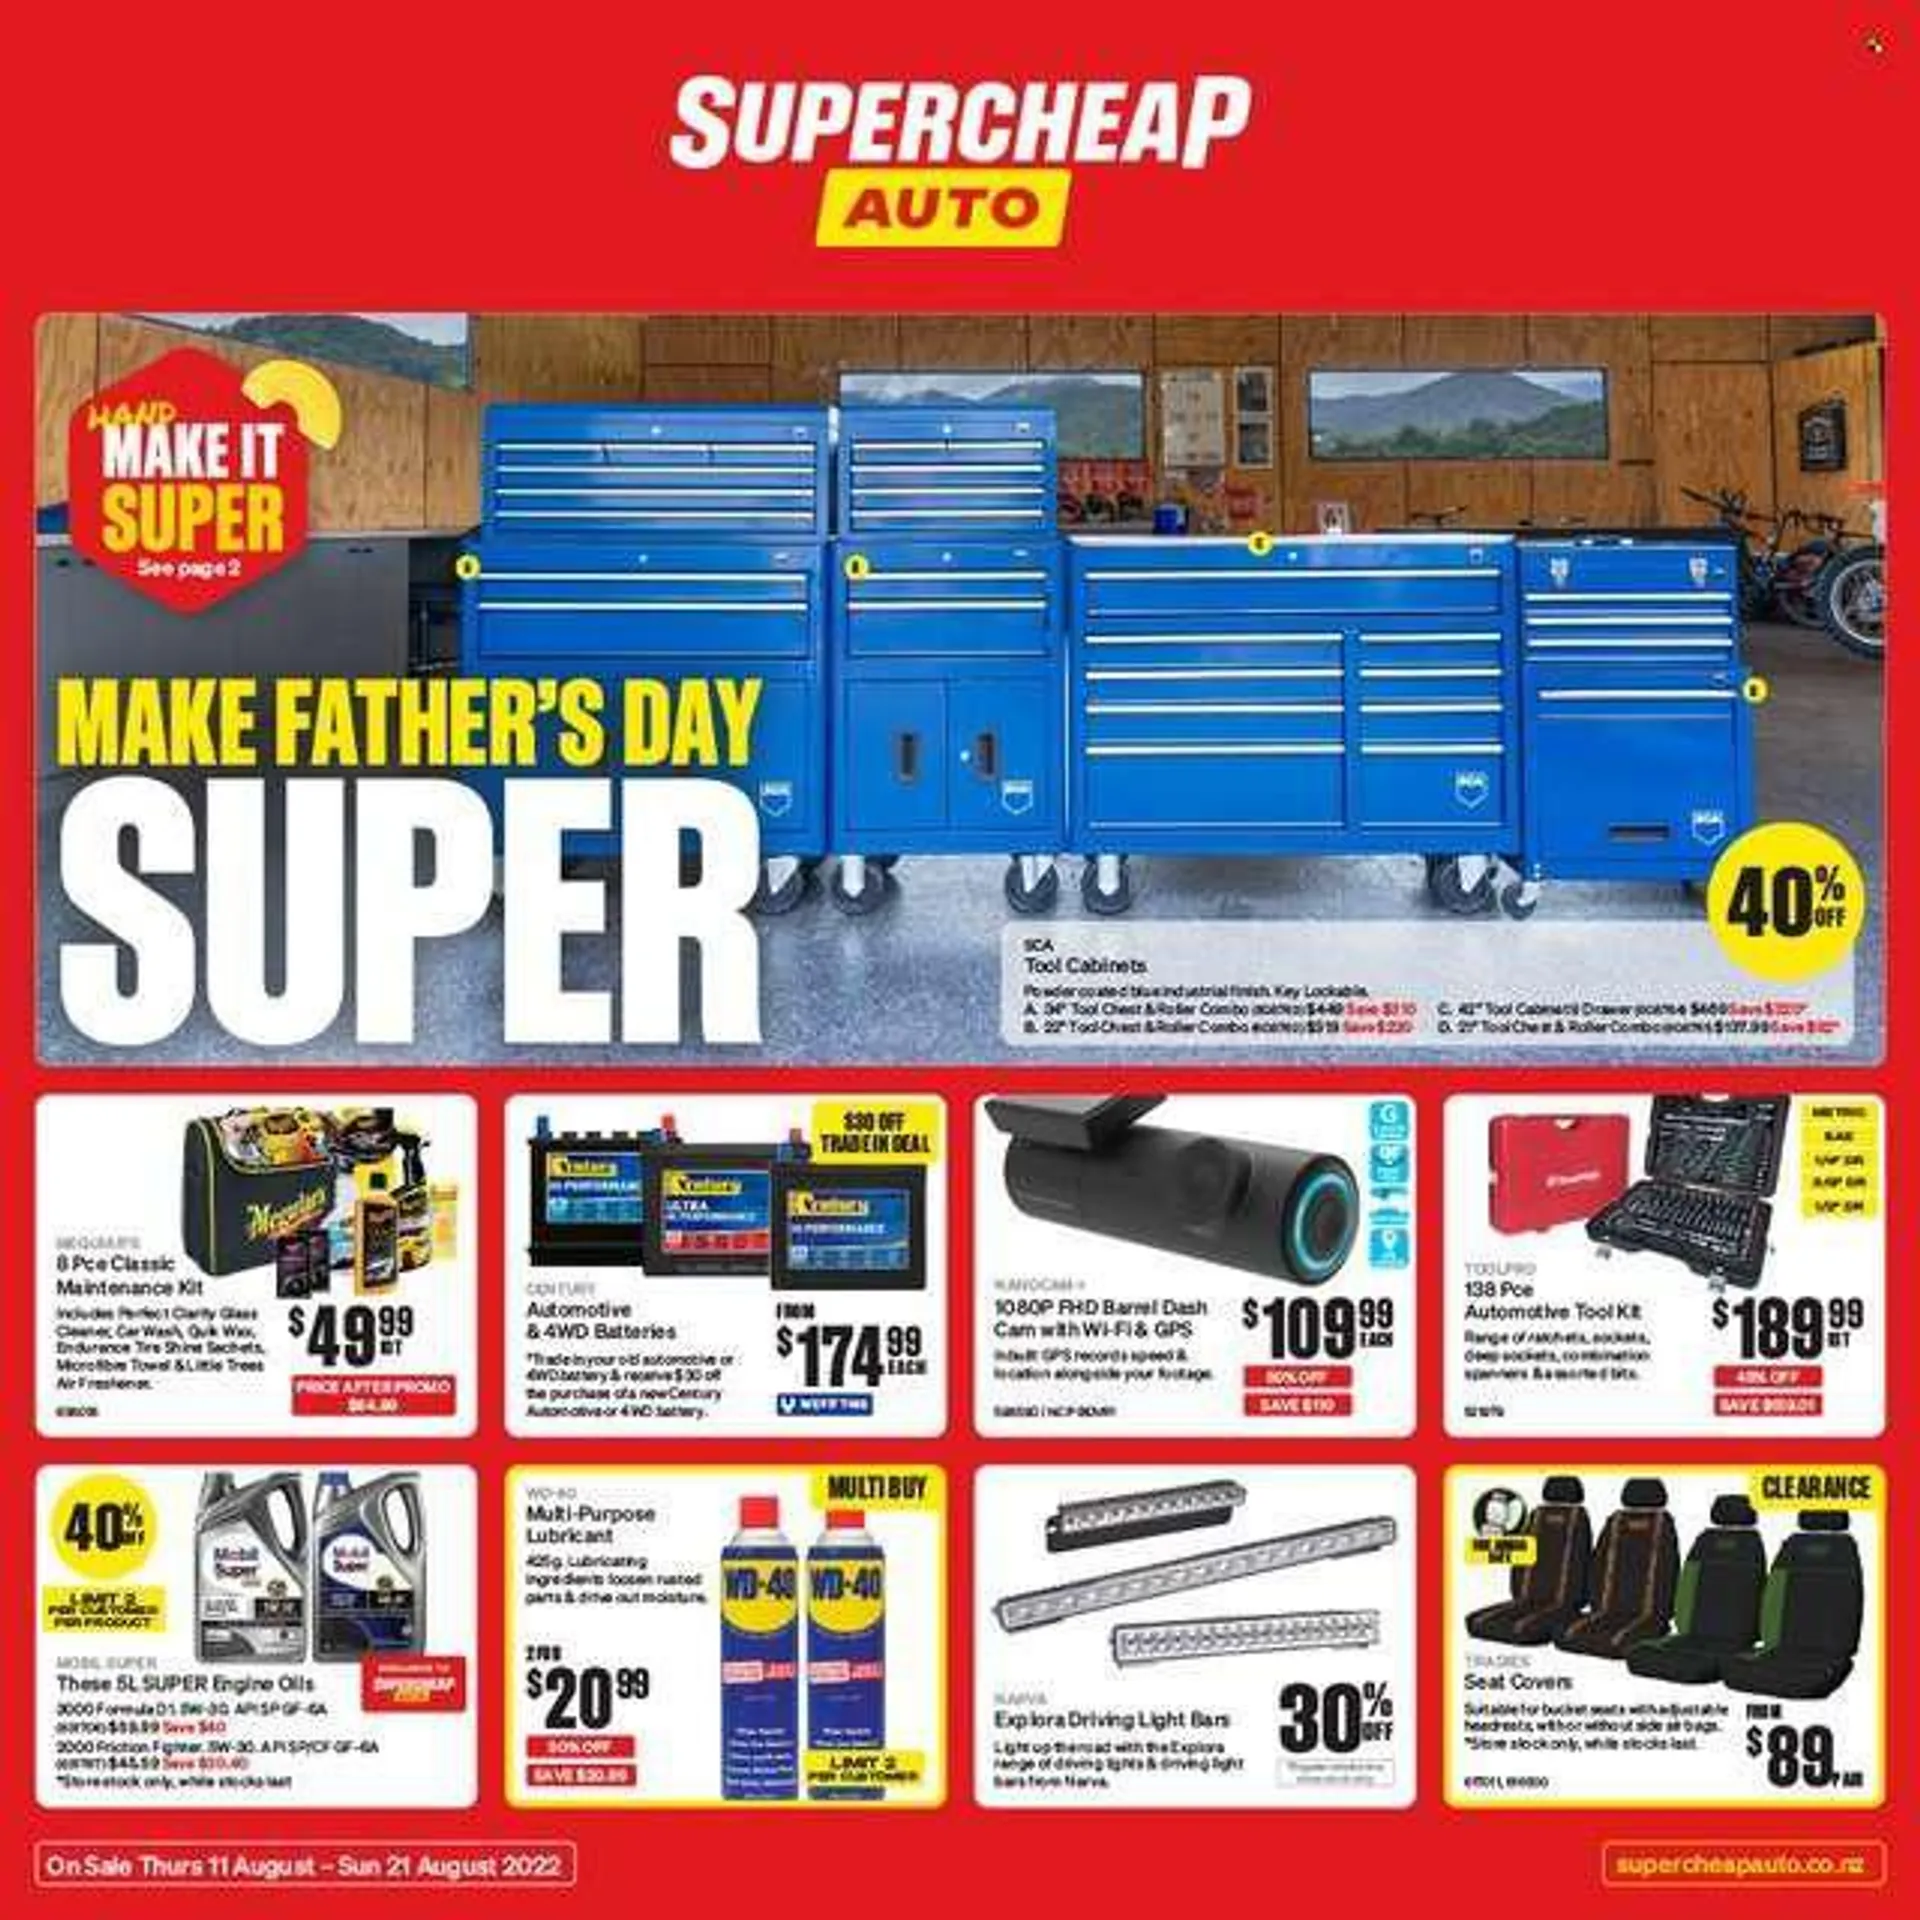 SuperCheap Auto mailer - 11.08.2022 - 21.08.2022 - Sales products - dashboard camera, tool chest, cabinet, lubricant, tool cabinets, WD-40, car seat cover, car battery, automotive batteries, tyre shine, Mobil, bag. Page 1.